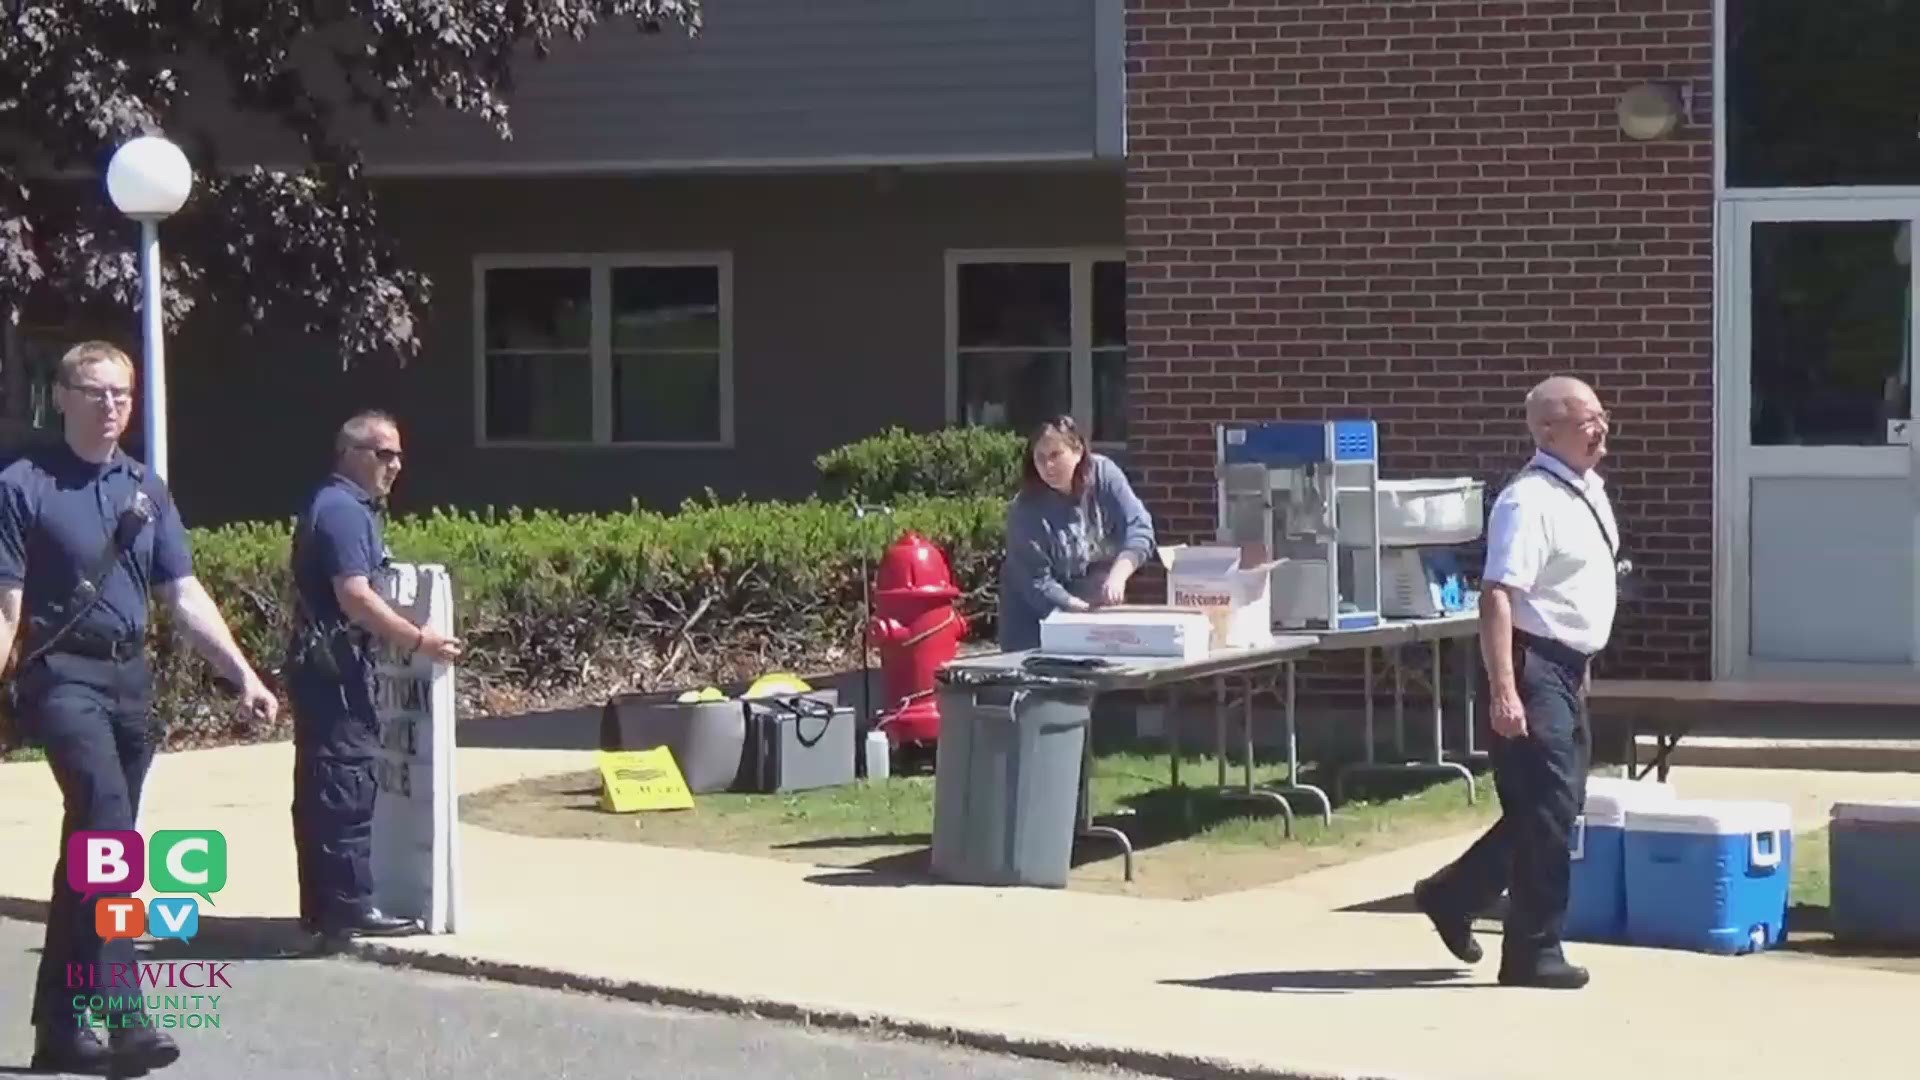 First footage taken in 2017 at the Fire Department “Safety Day” events.  The remaining footage was taken in 2018 at the Summer Recreation program.  The Fire Dept. brings the truck over for children to check out and then hose them down in the court yard.